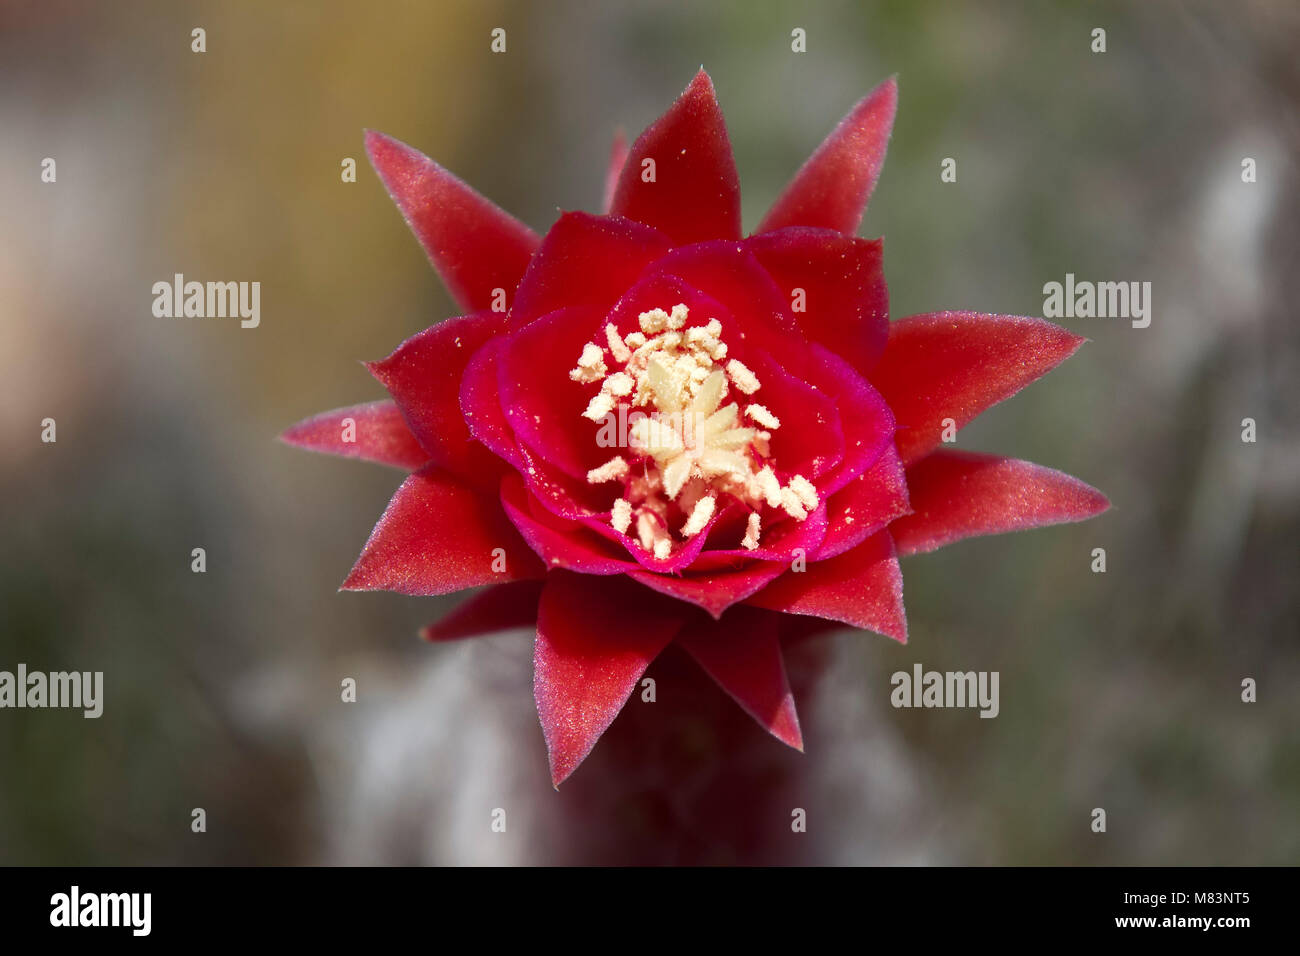 Sydney Australia, red flower close up of silver touch cactus Stock Photo